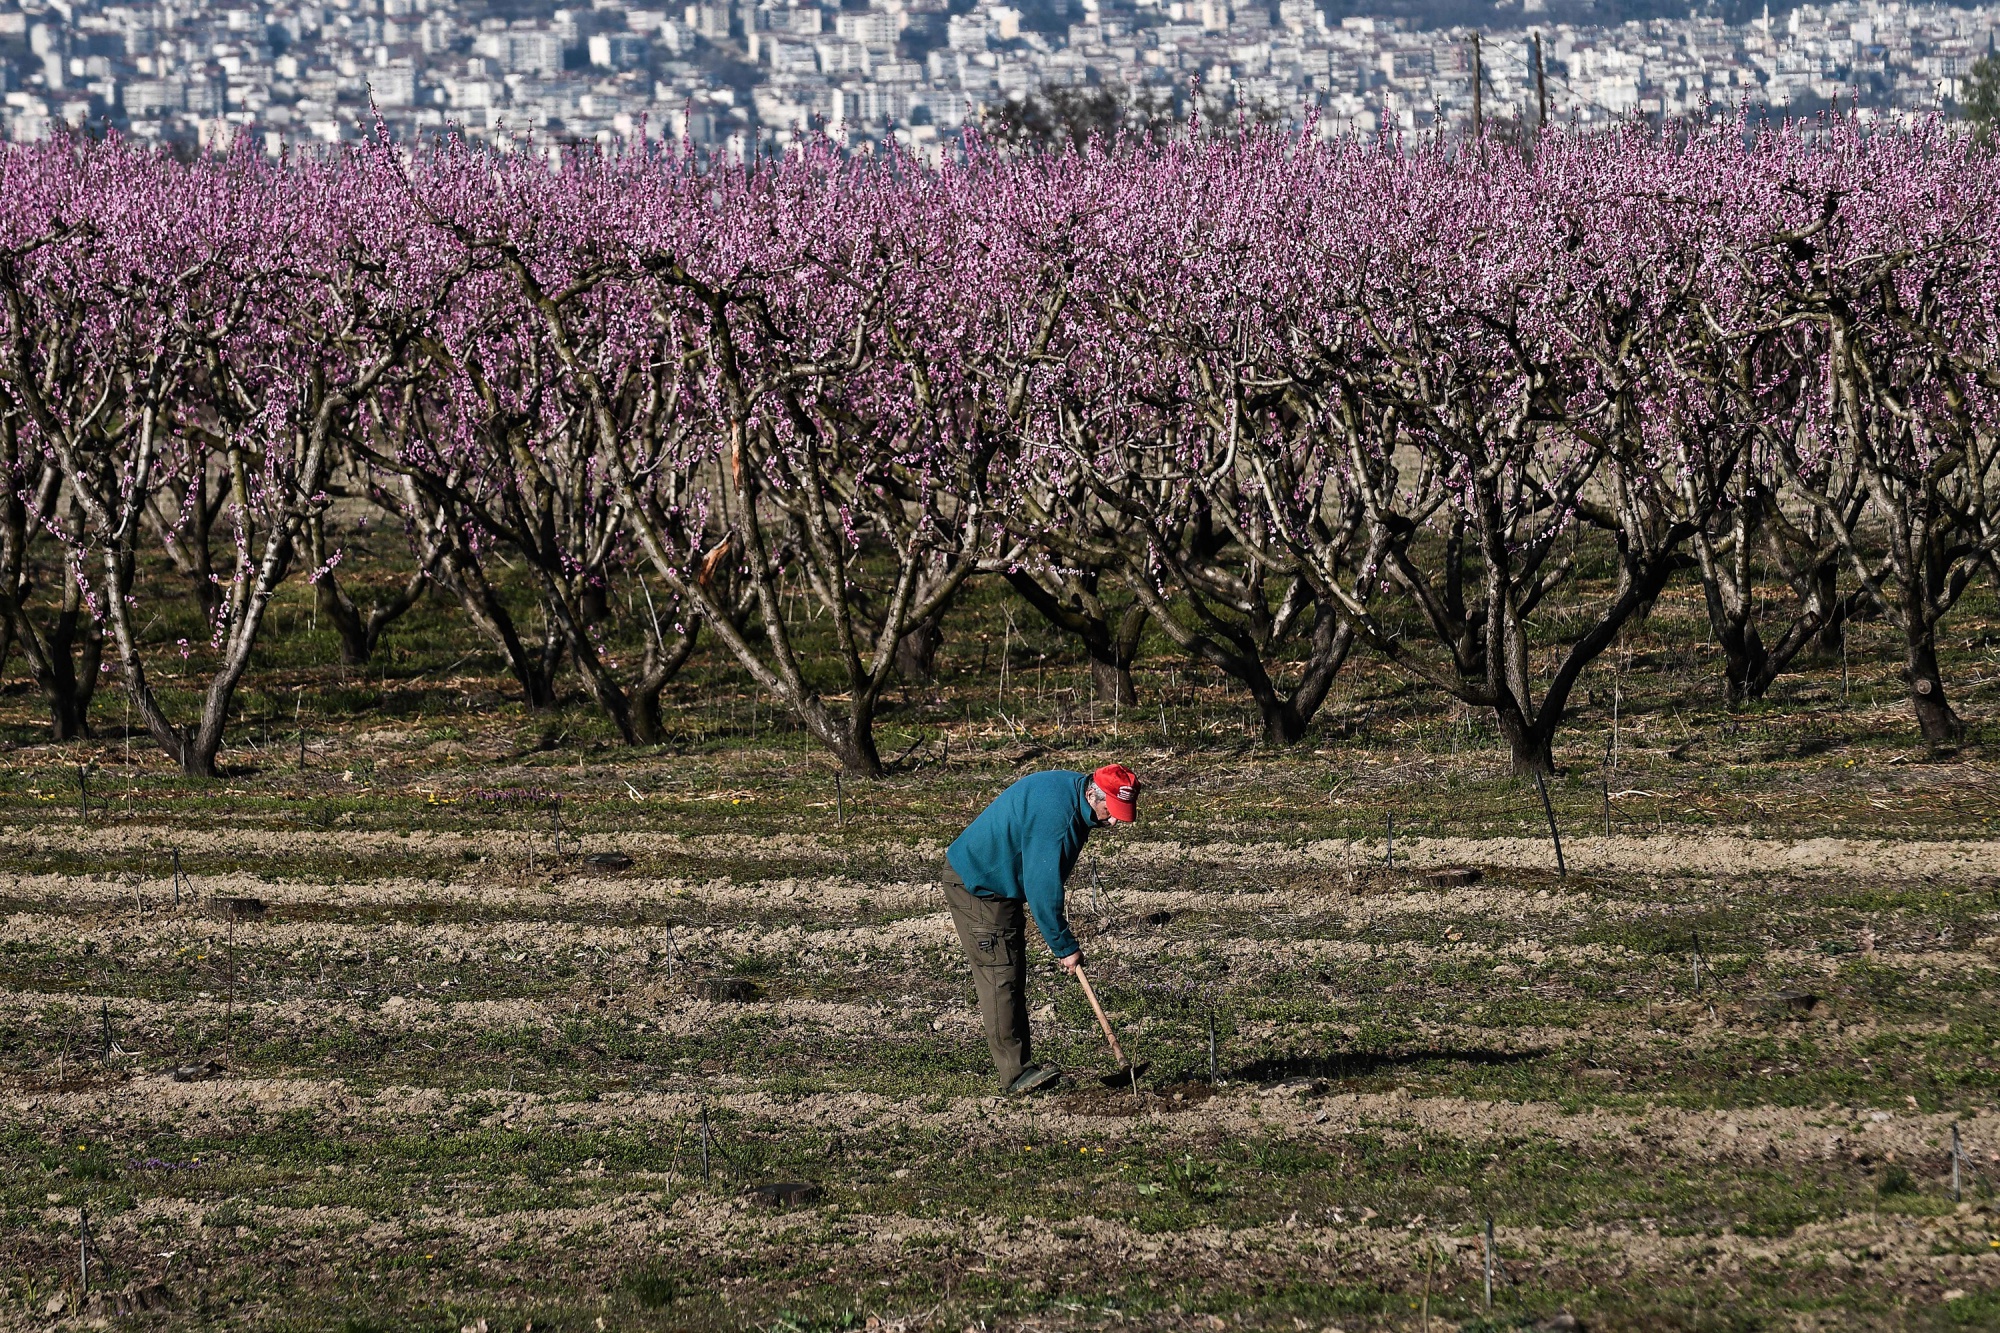 A worker attends to the land by peach trees in Northern Greece.